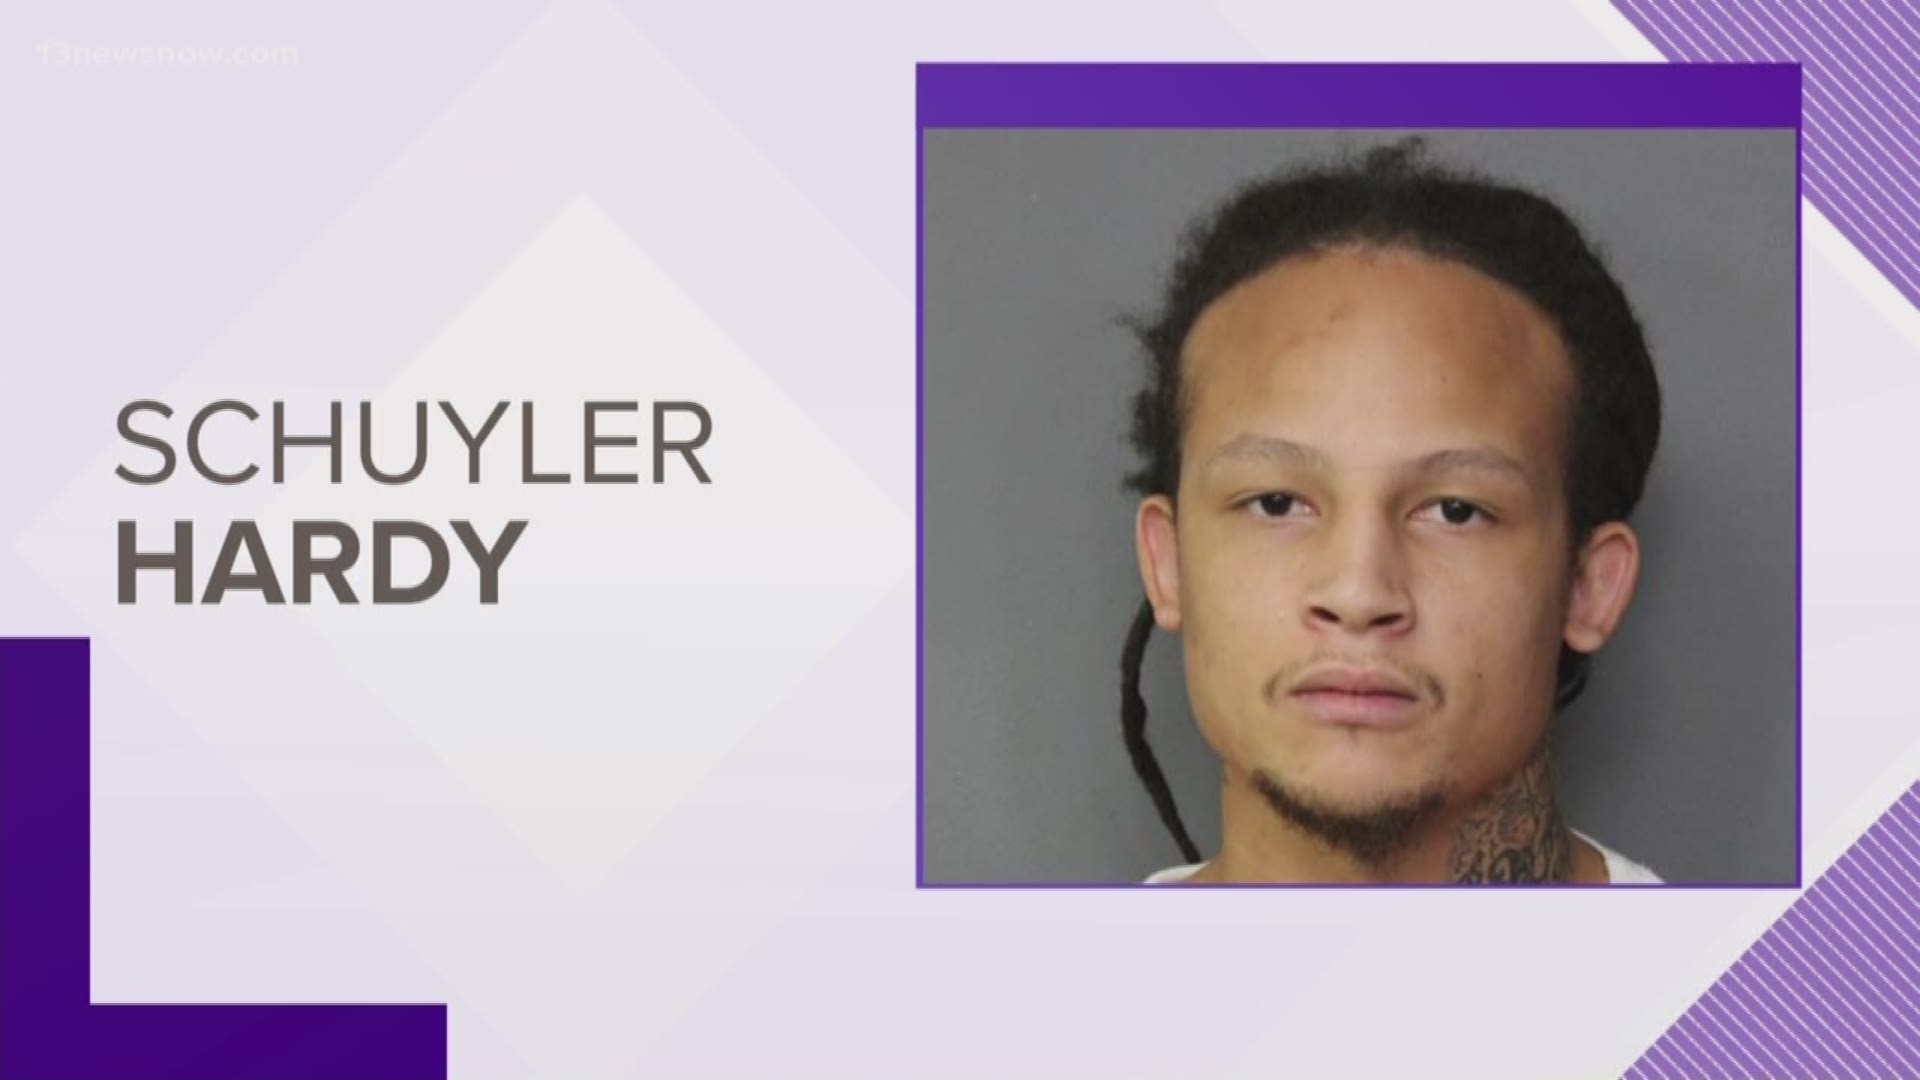 Police said Schuyler Hardy is wanted in connection to a November 6 shooting. The US Marshals are now looking for him.